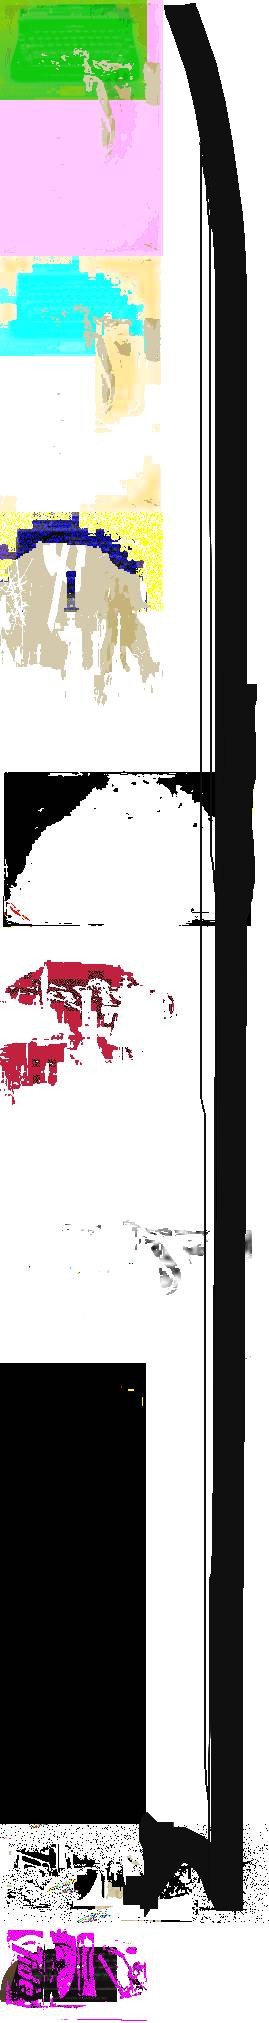 sunrise,_clothing_and_personal_effects,_industrial--52537-677-16493.jpg